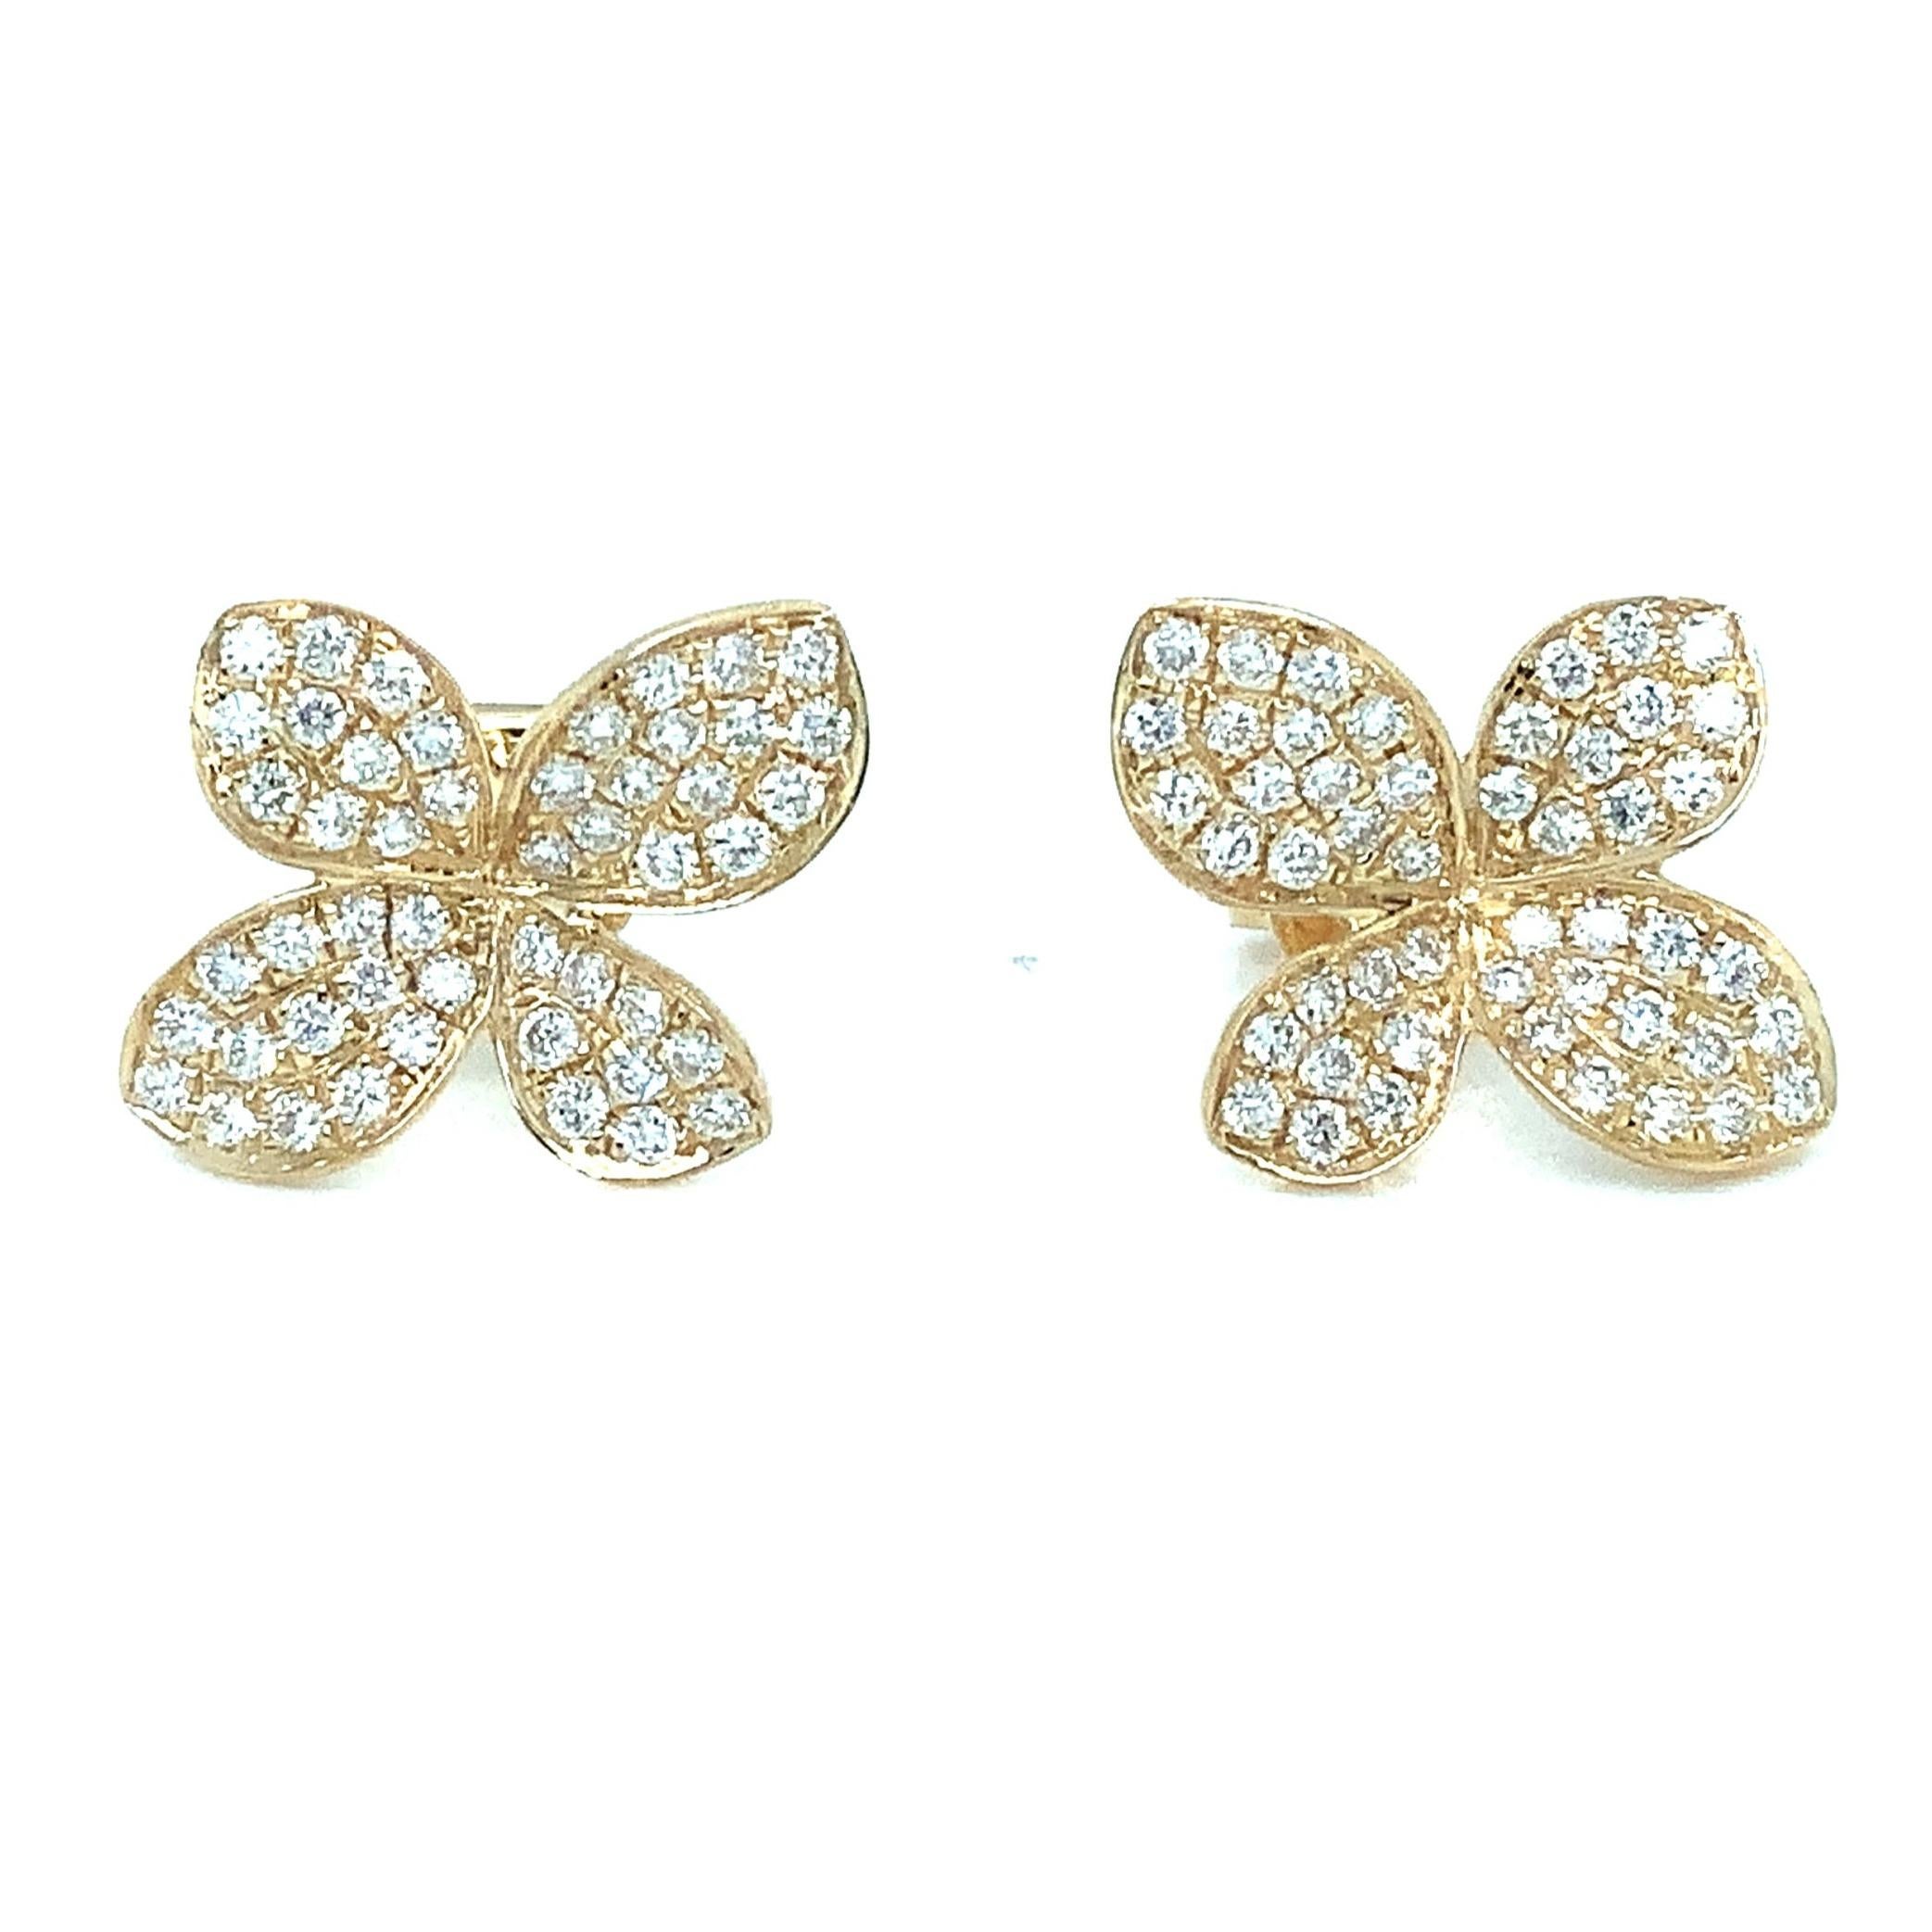 The Afarin Collection Pavé Petite Garden Diamond Stud Earrings feature 49 Round Brilliant Cut Diamonds totaling 0.68 cts t.w.,

All The Diamonds are F in Color, VS in Clarity,

Excellent Make and Polish,

These Earrings Measurements are 17 x